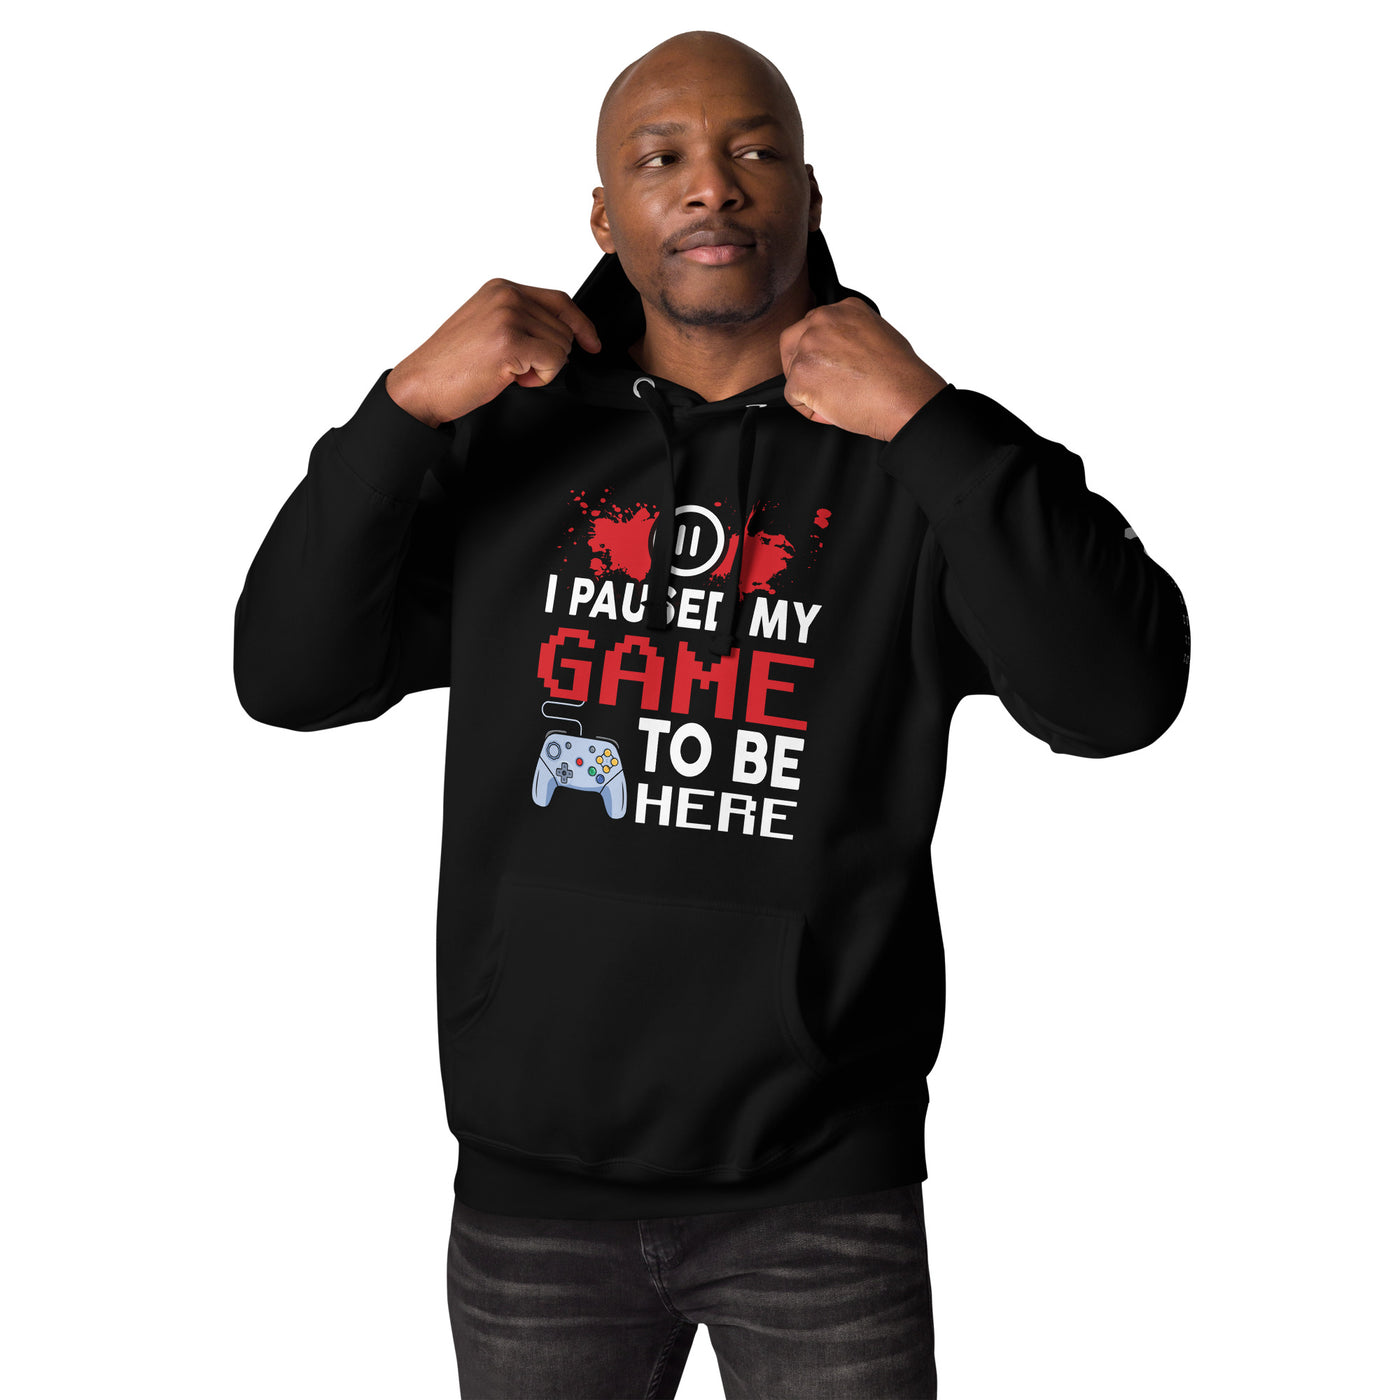 I Paused my Game to be here ( red pixelated text ) - Unisex Hoodie